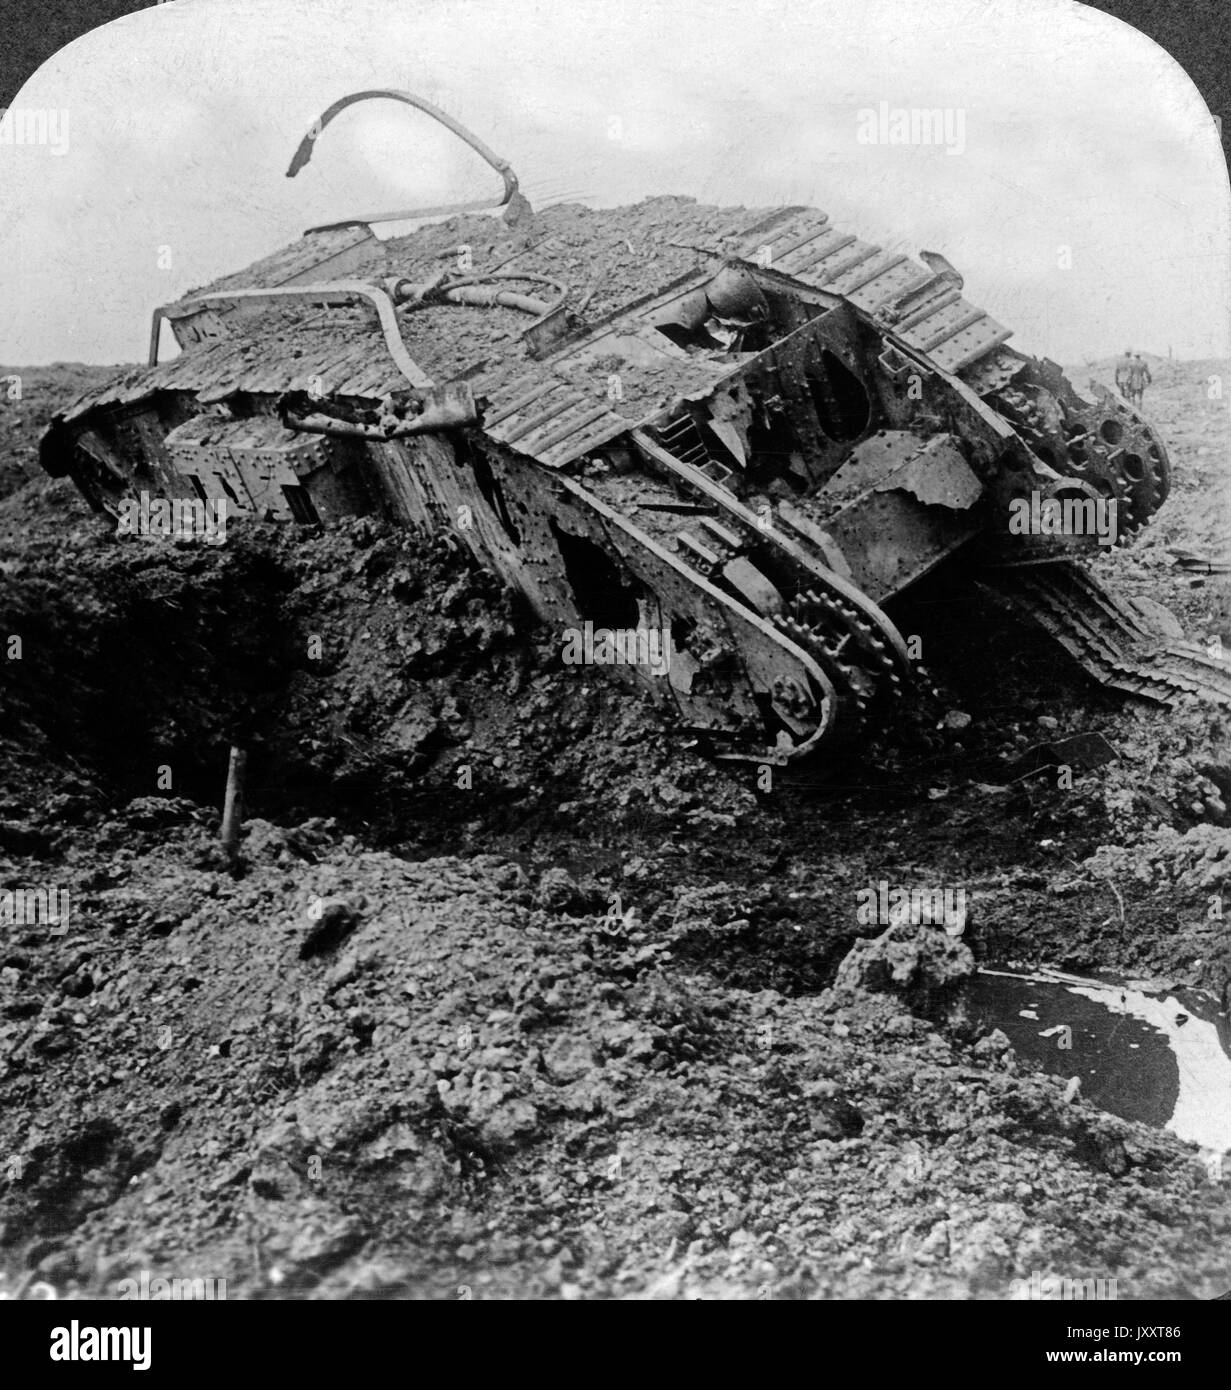 Vom Feind zerstörter Panzer bei Cambrai, Frankreich 1917. Ripped and battered to death by the enemy - a derelict tank near Cambrai, France 1917. Stock Photo